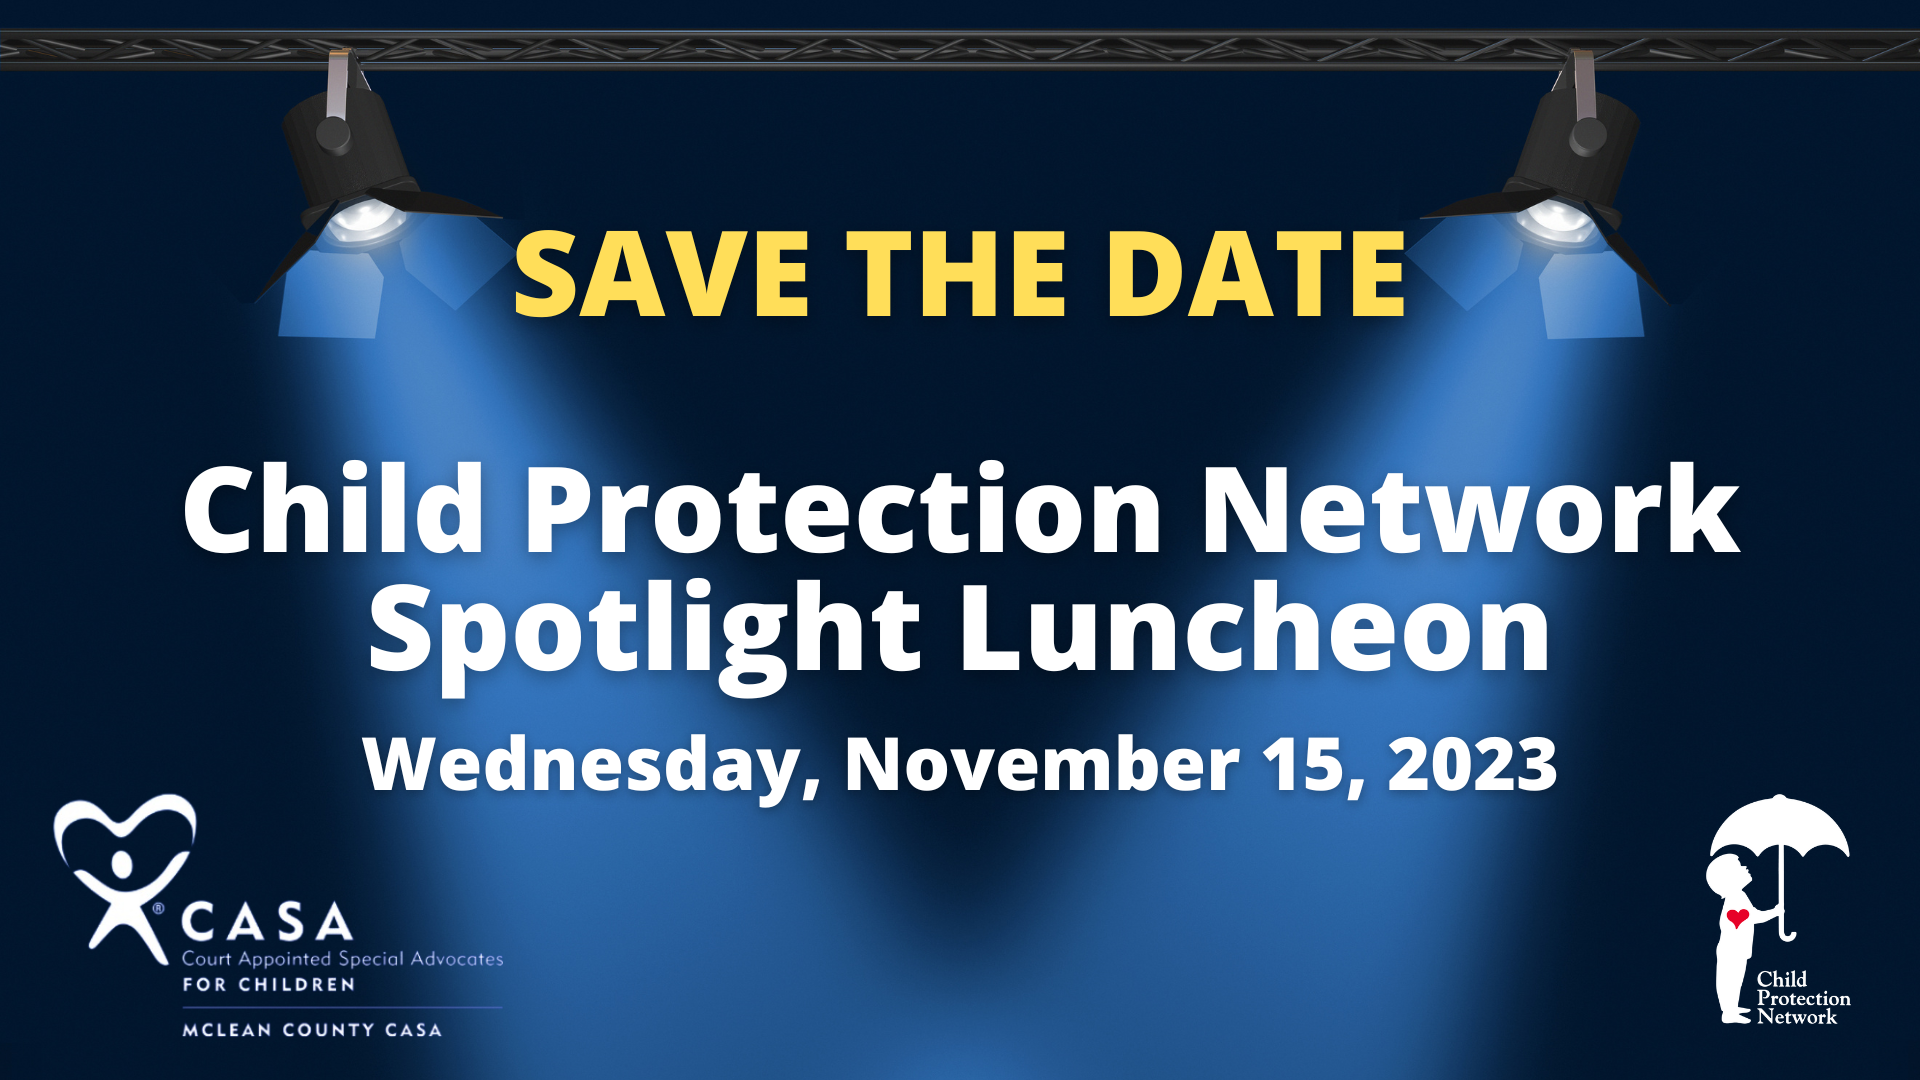 Child Protection Network: Spotlight Luncheon